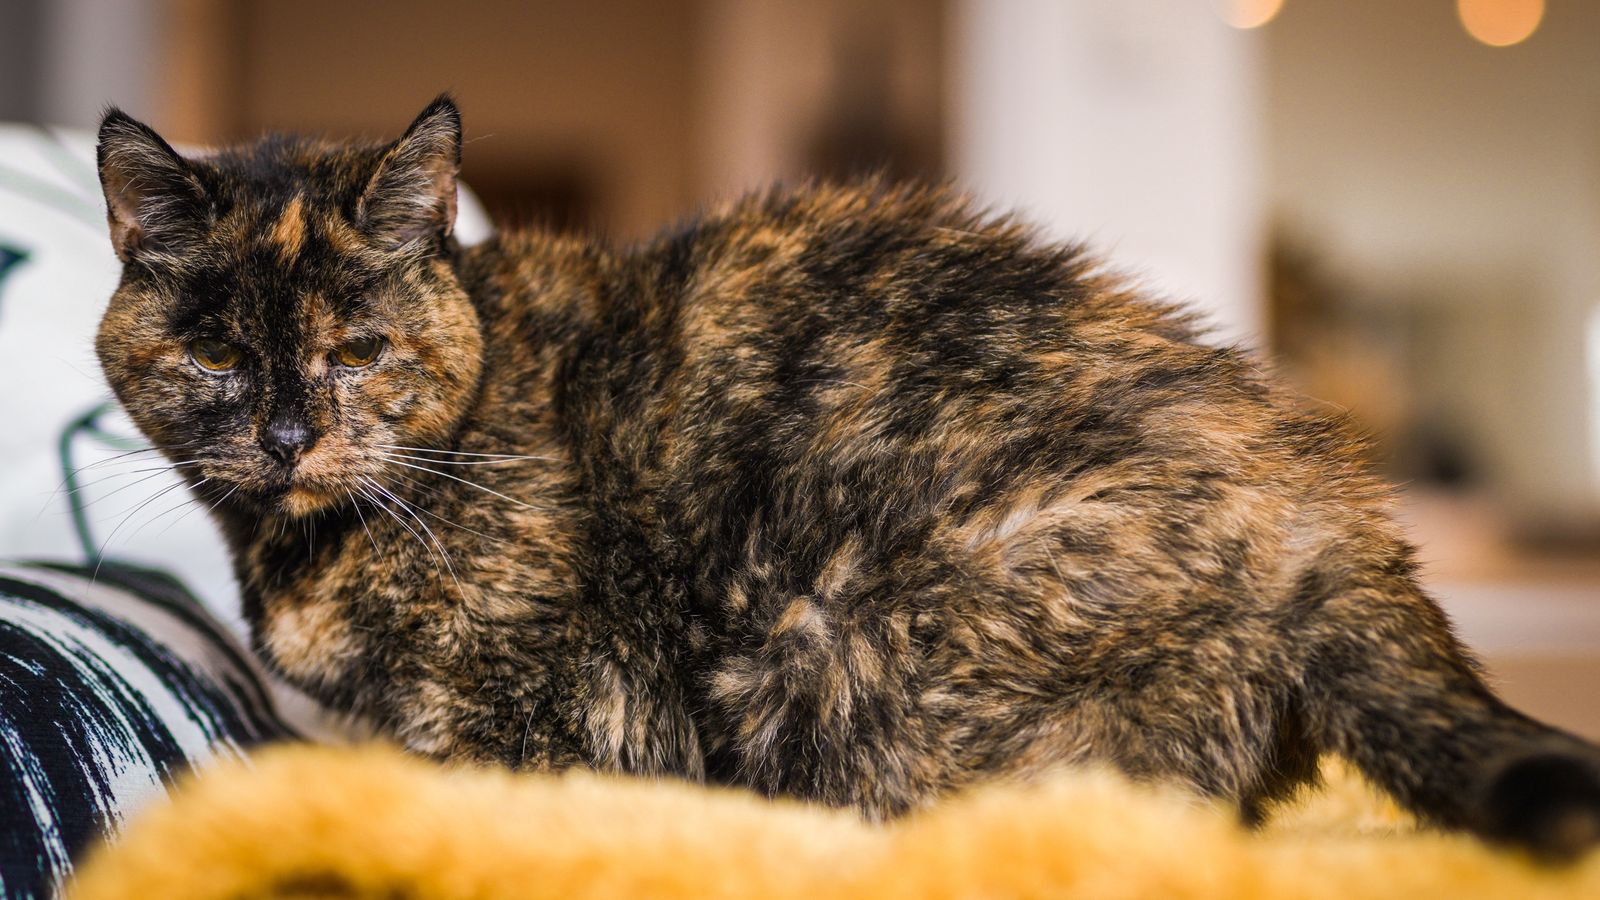 World's oldest living cat crowned in southeast London